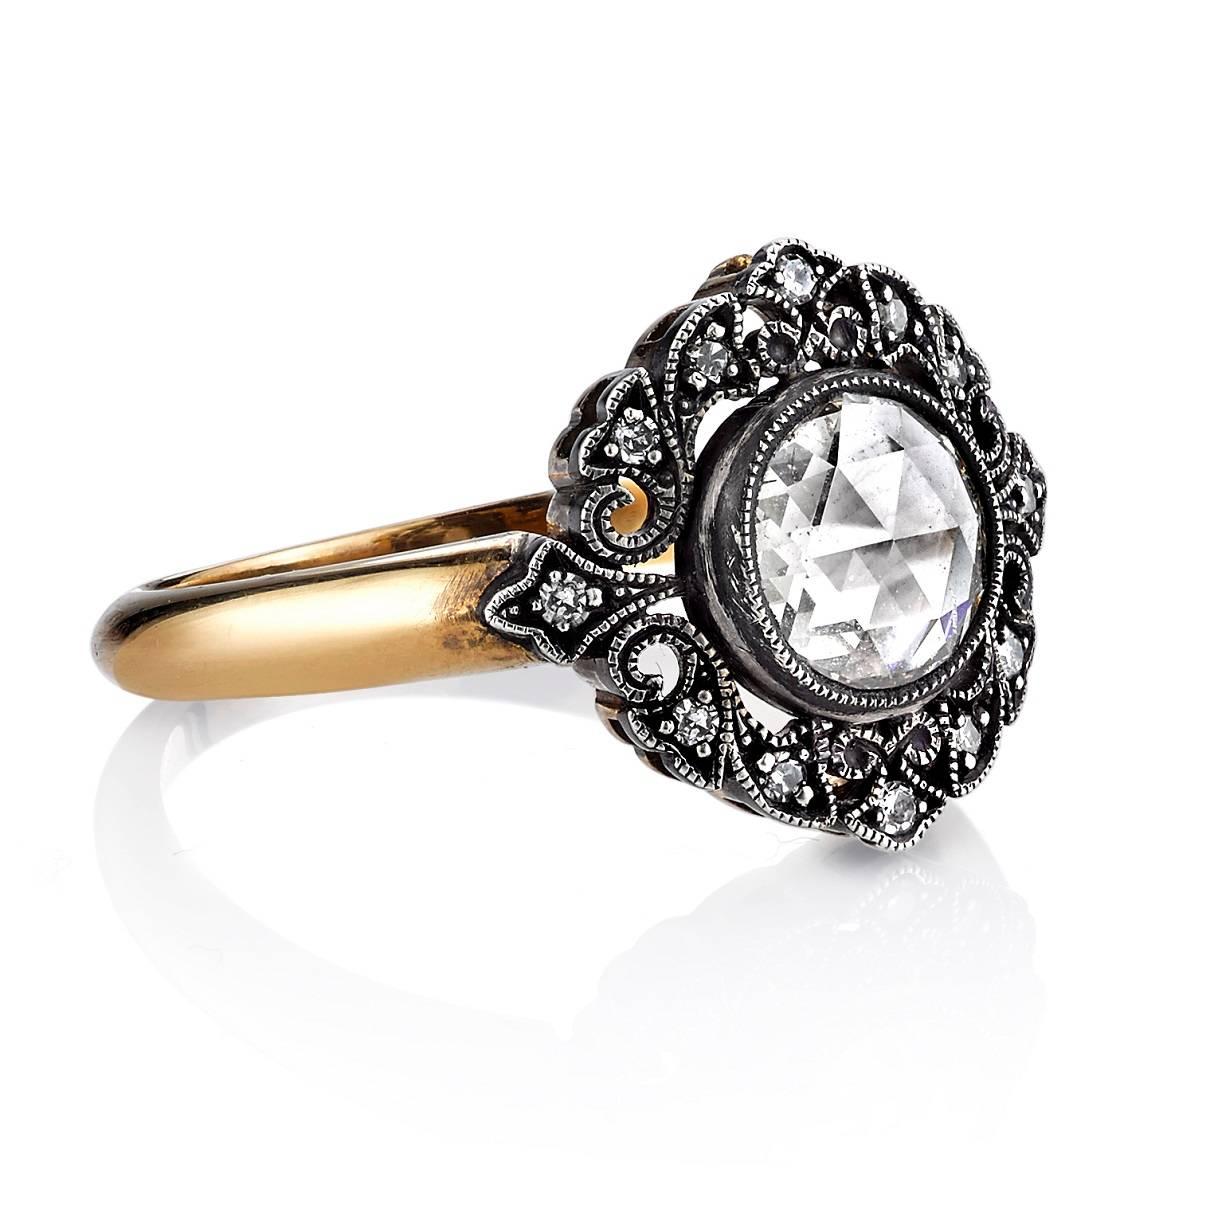 0.85ct G/VS2 EGL certified Rose cut diamond set in a handcrafted 18K oxidized yellow gold and silver mounting. A Victorian inspired design featuring a bezel set diamond, two toned metal and delicate halo.